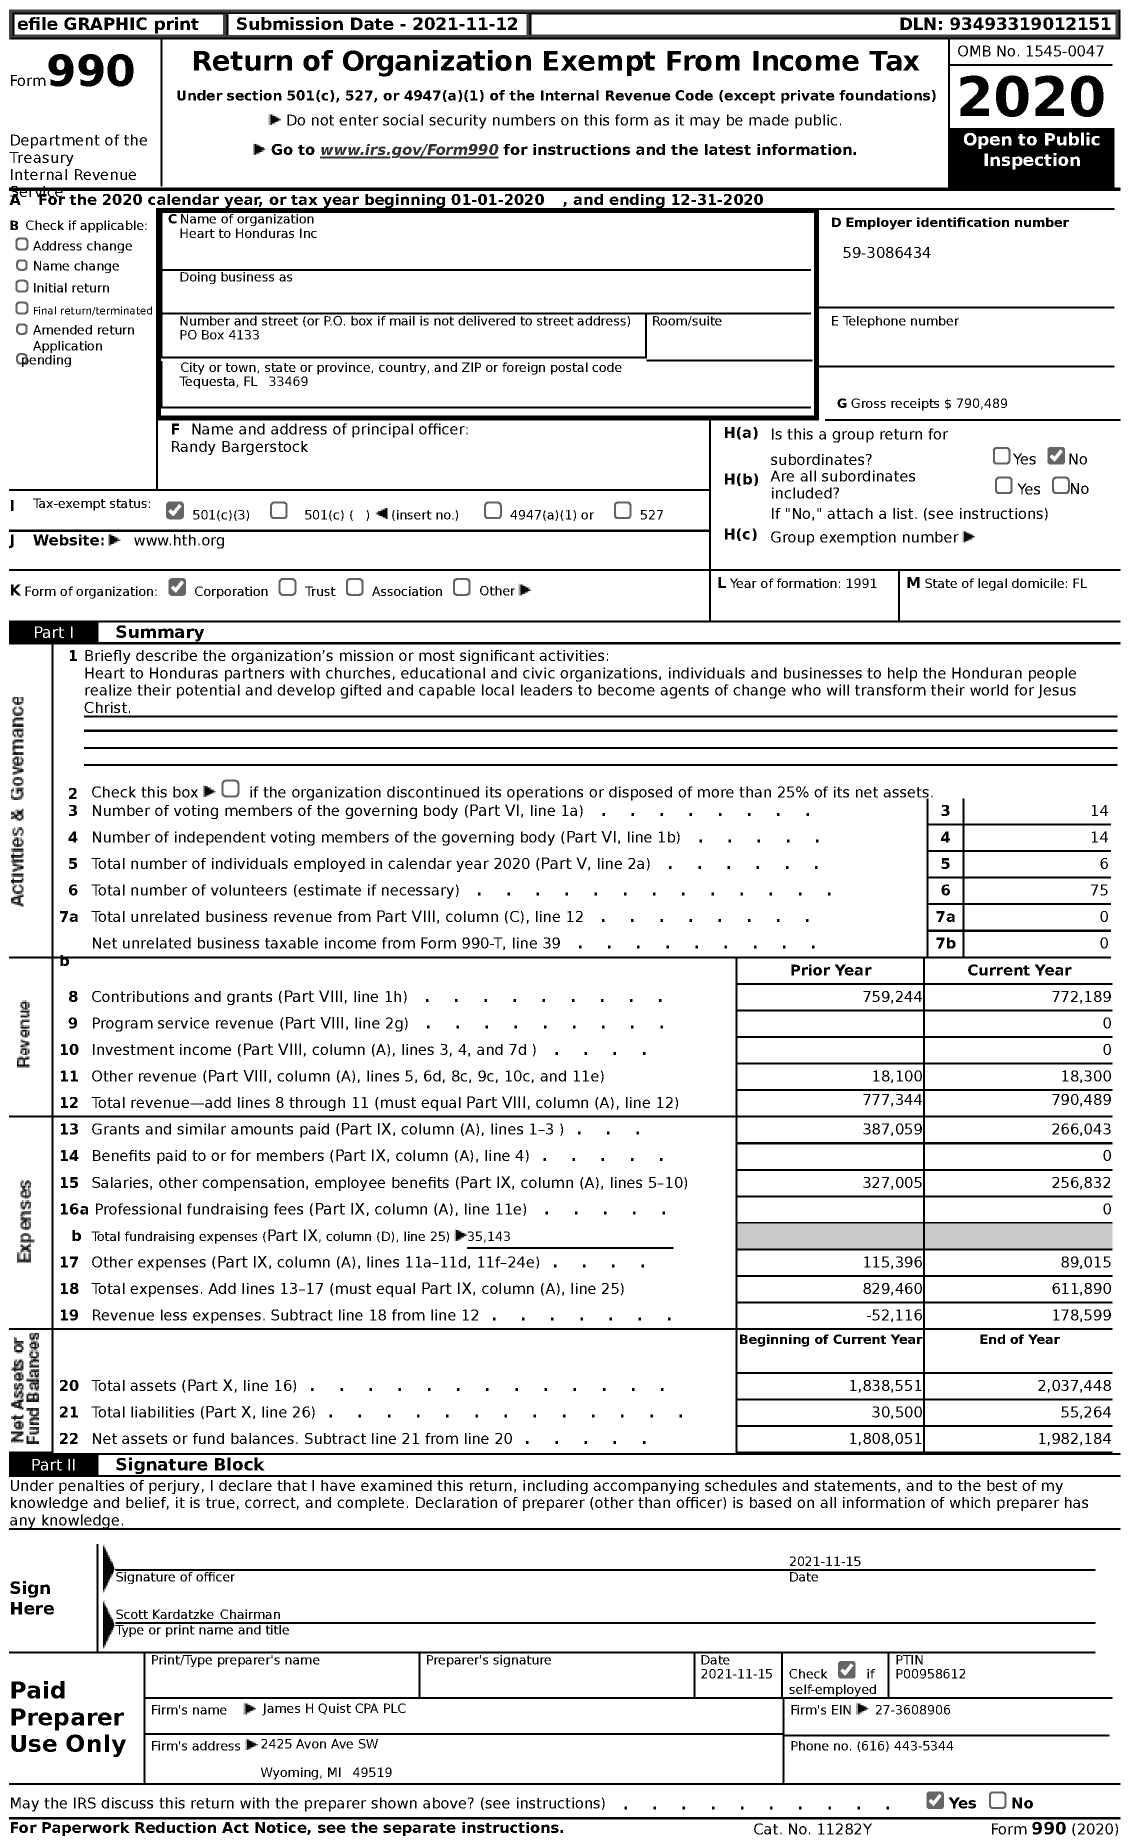 Image of first page of 2020 Form 990 for Heart to Honduras (HTH)